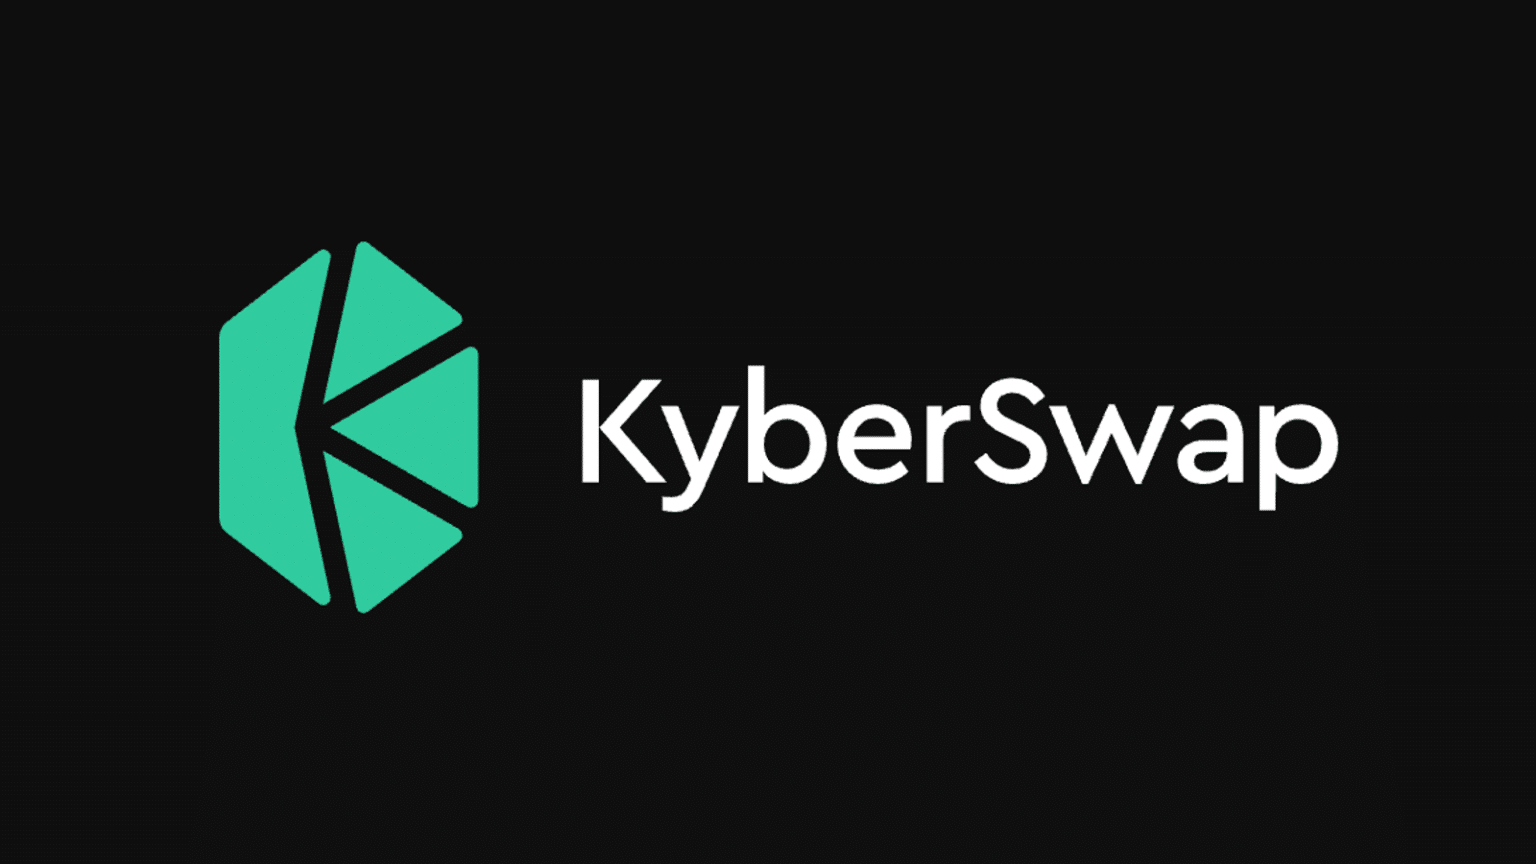 KyberSwap’s CEO Says Staff Strength Reduced by 50% Following Exploit and Related Challenges